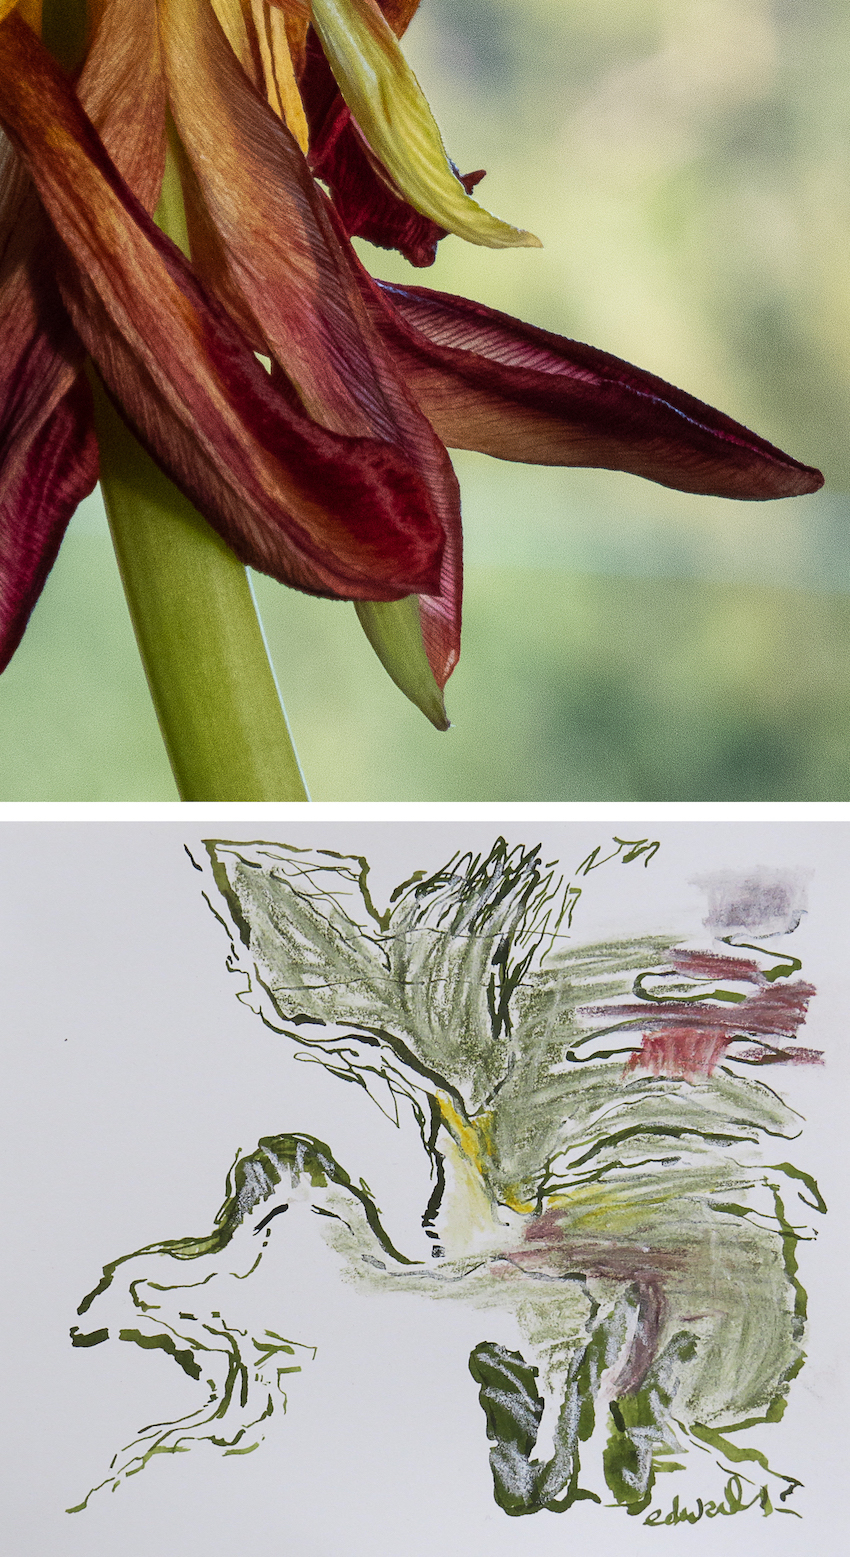 petals with drawing digital print with drawing by Canadian contemporary artist photographer barbra edwards Gulf Islands BC